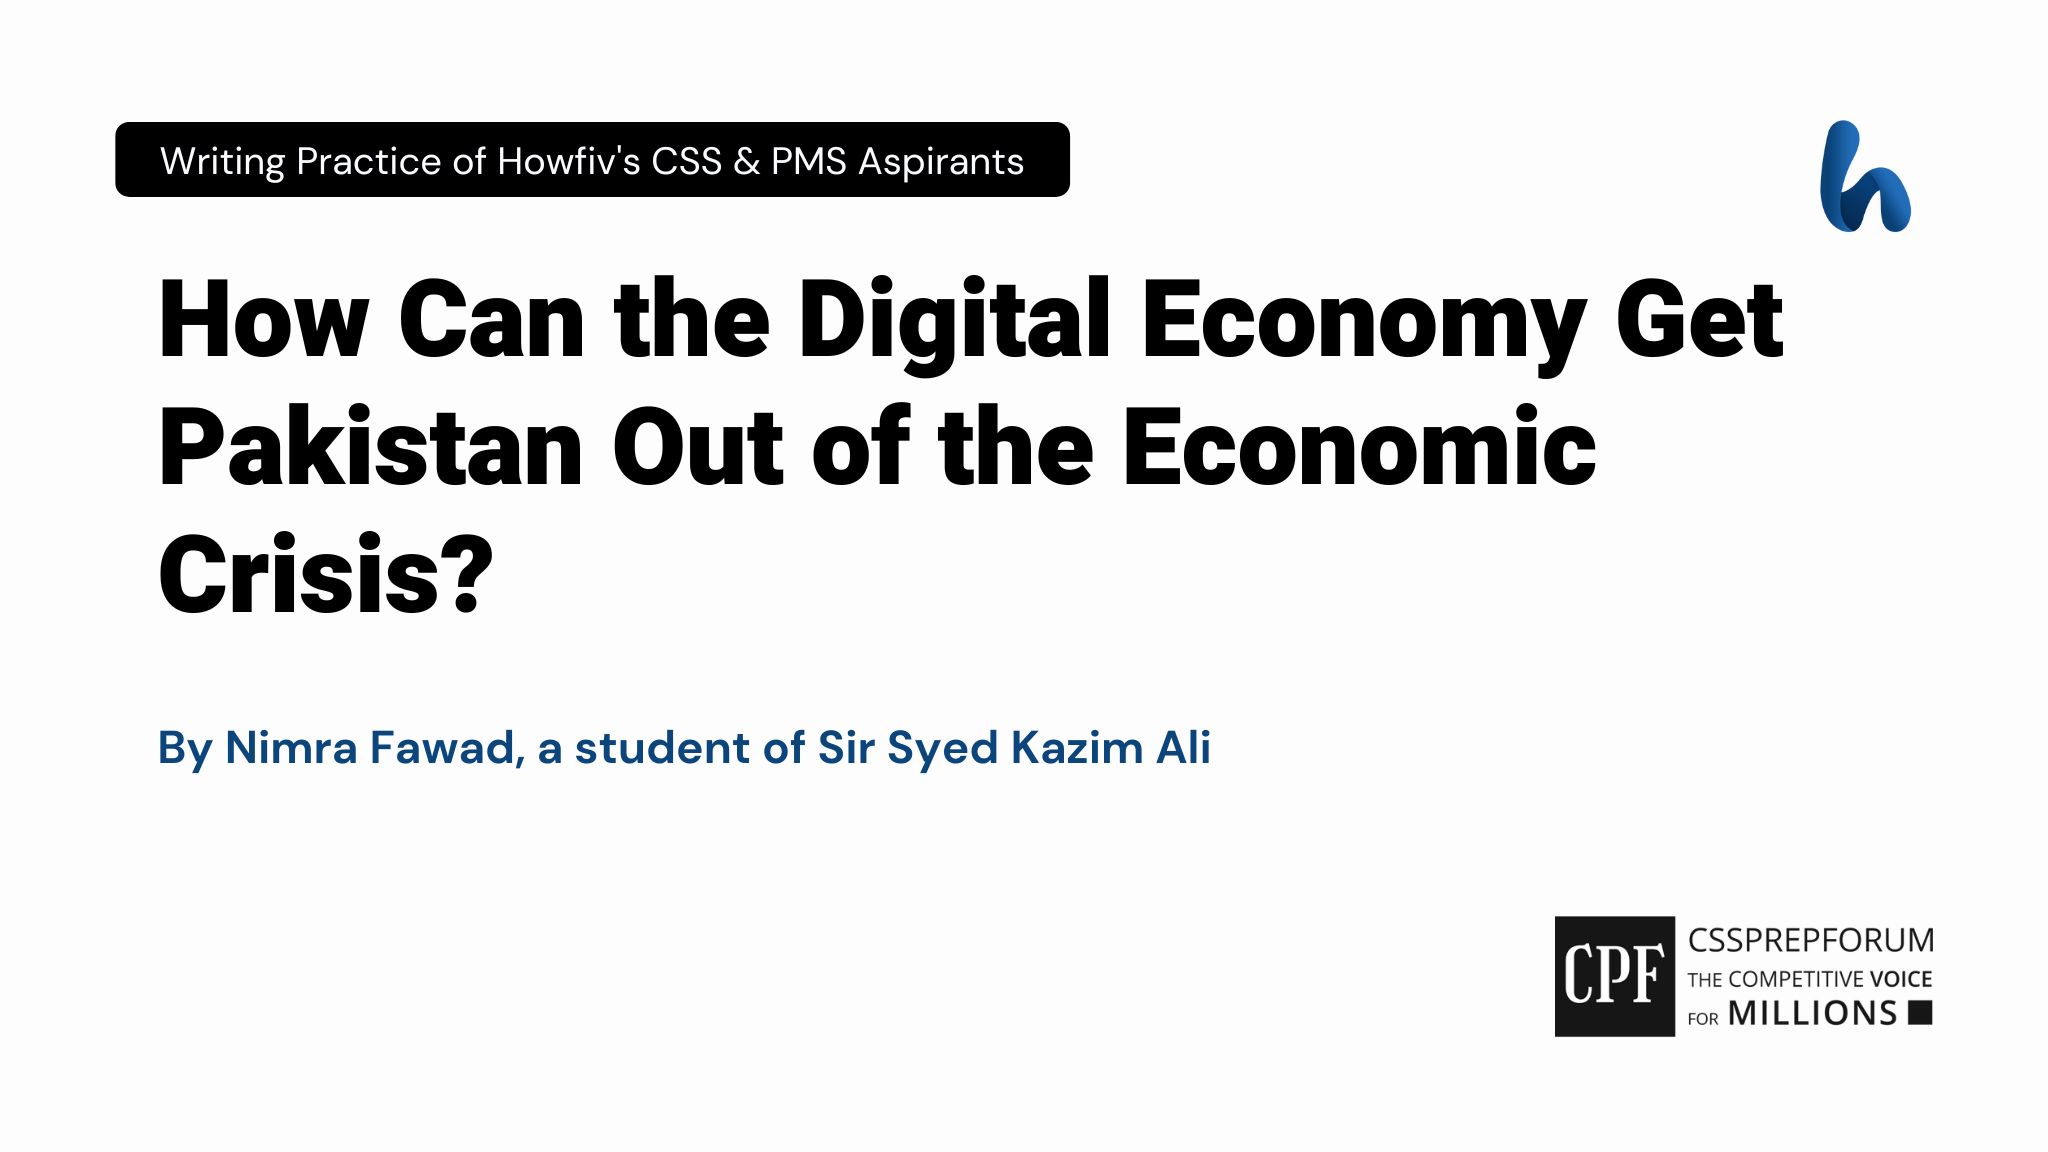 How Can the Digital Economy Get Pakistan Out of the Economic Crisis?